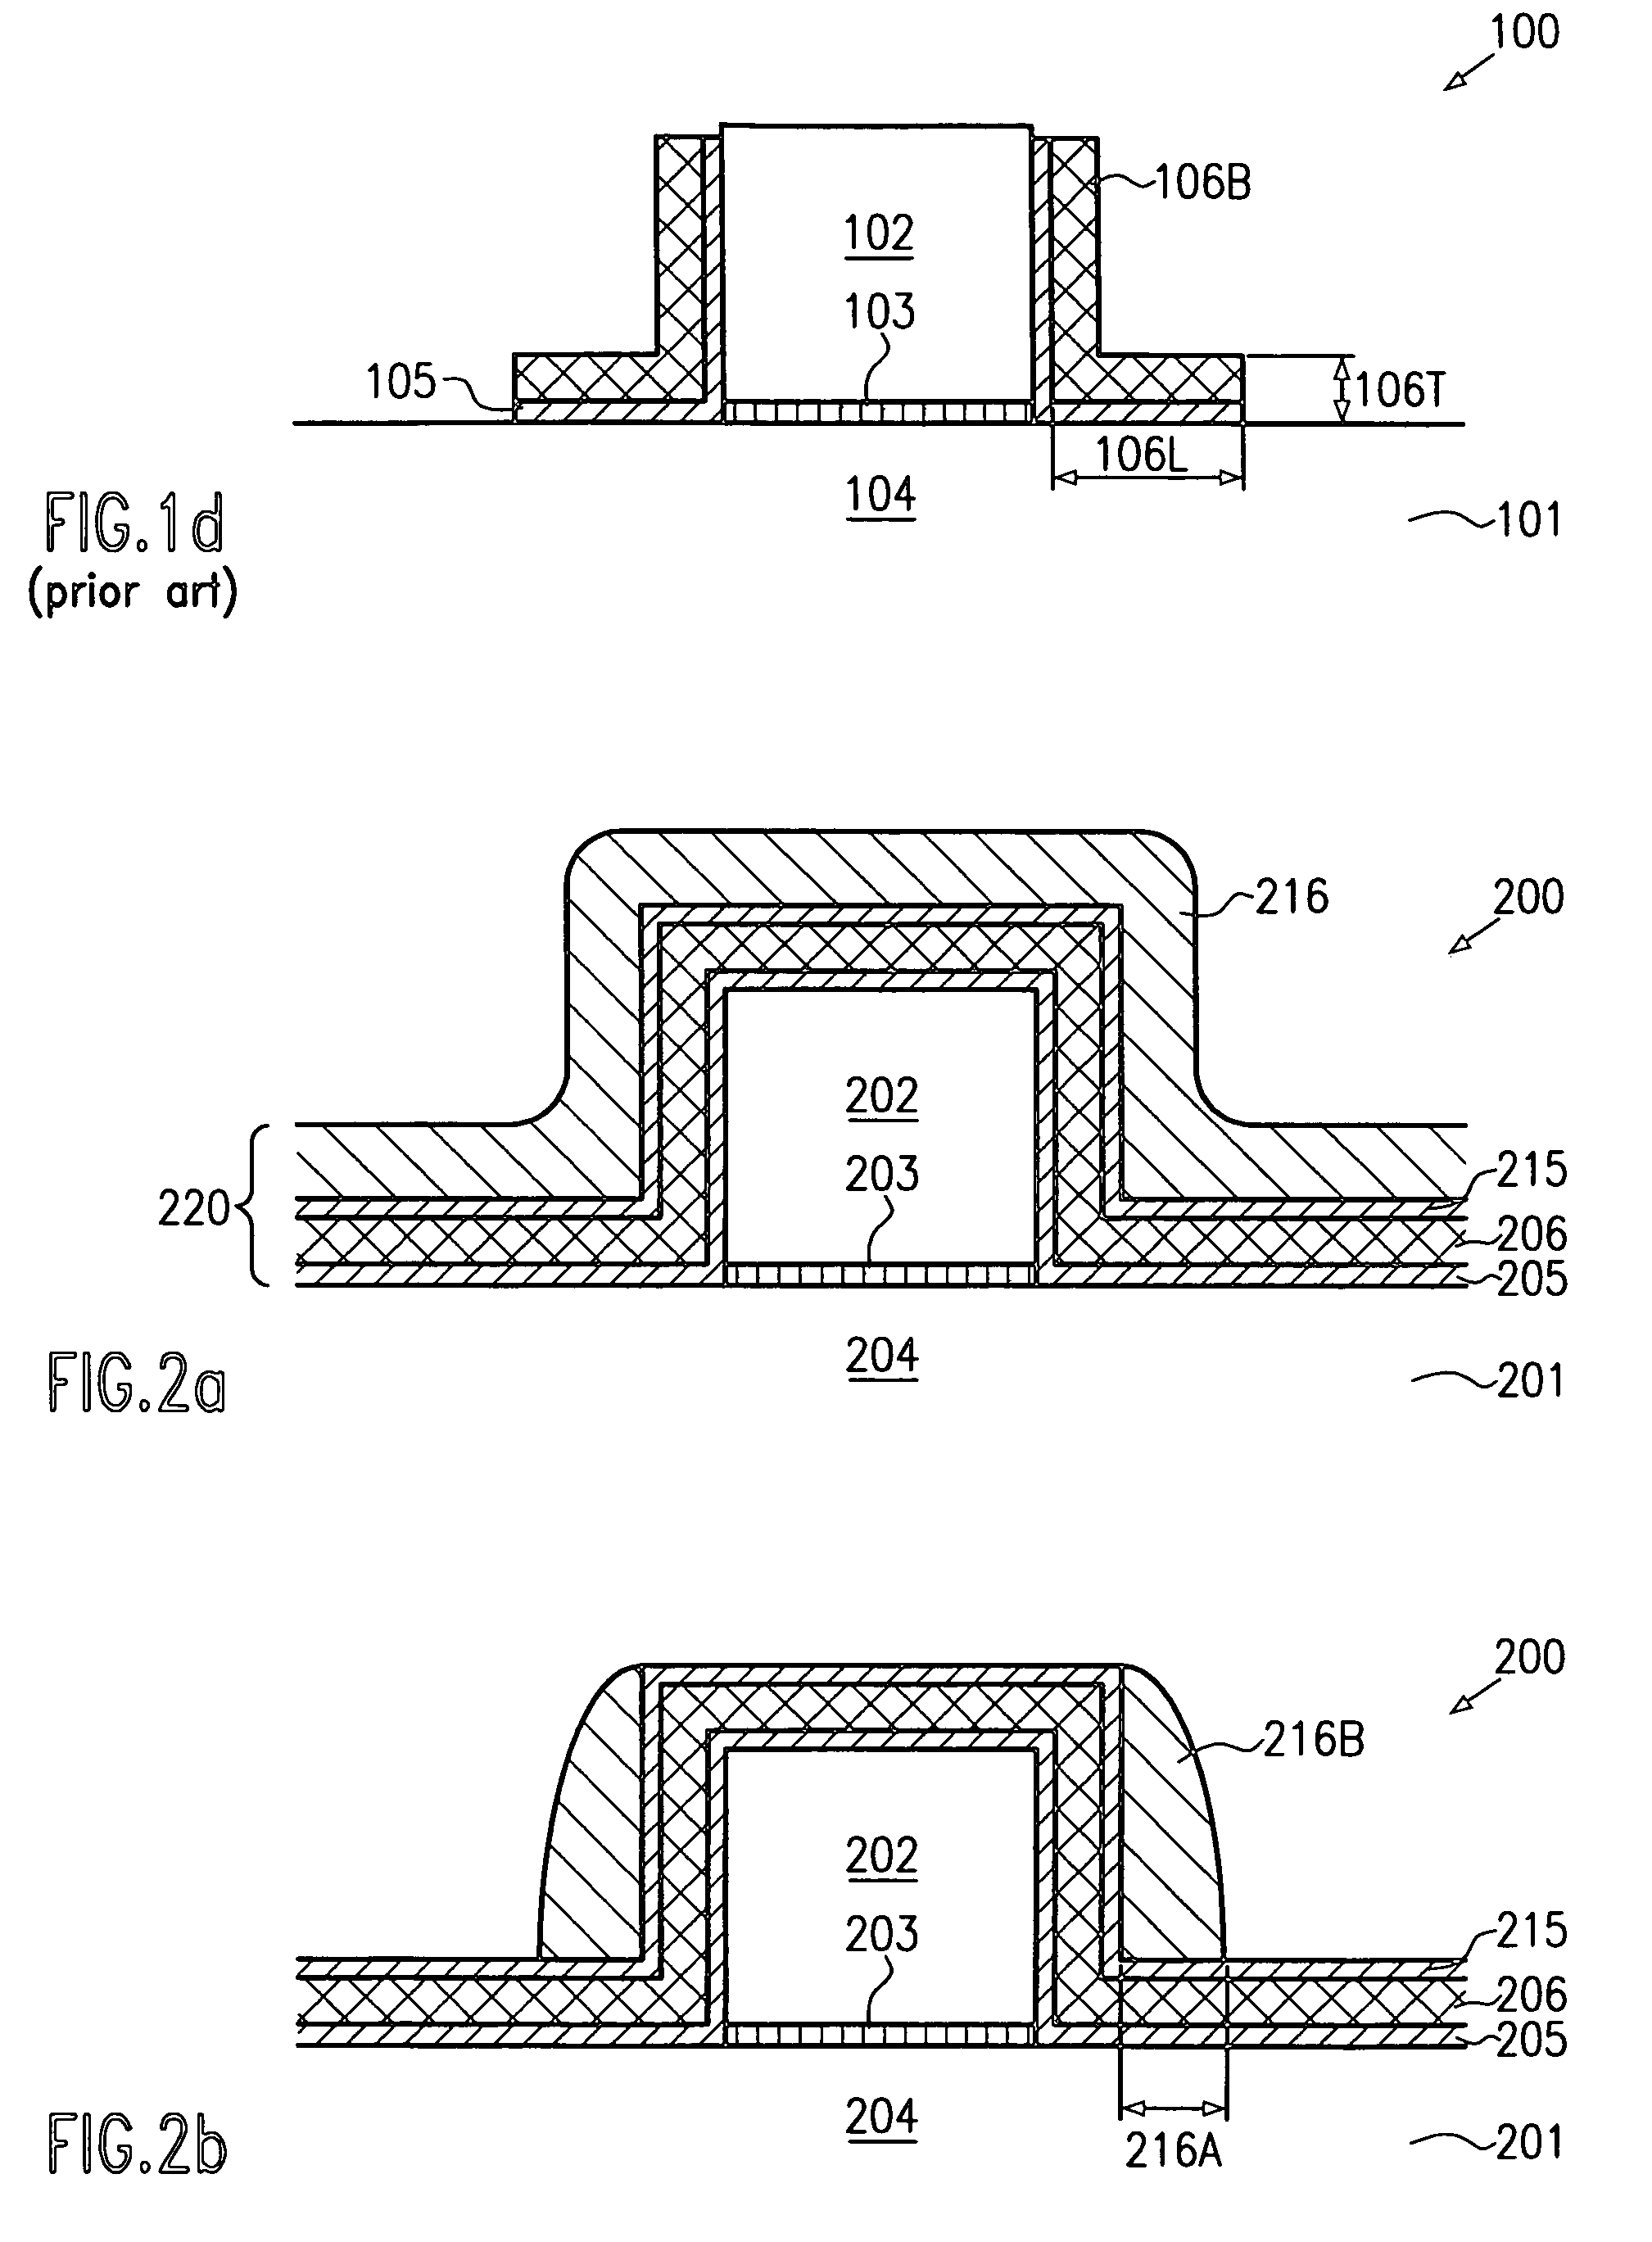 Method of forming a conformal spacer adjacent to a gate electrode structure